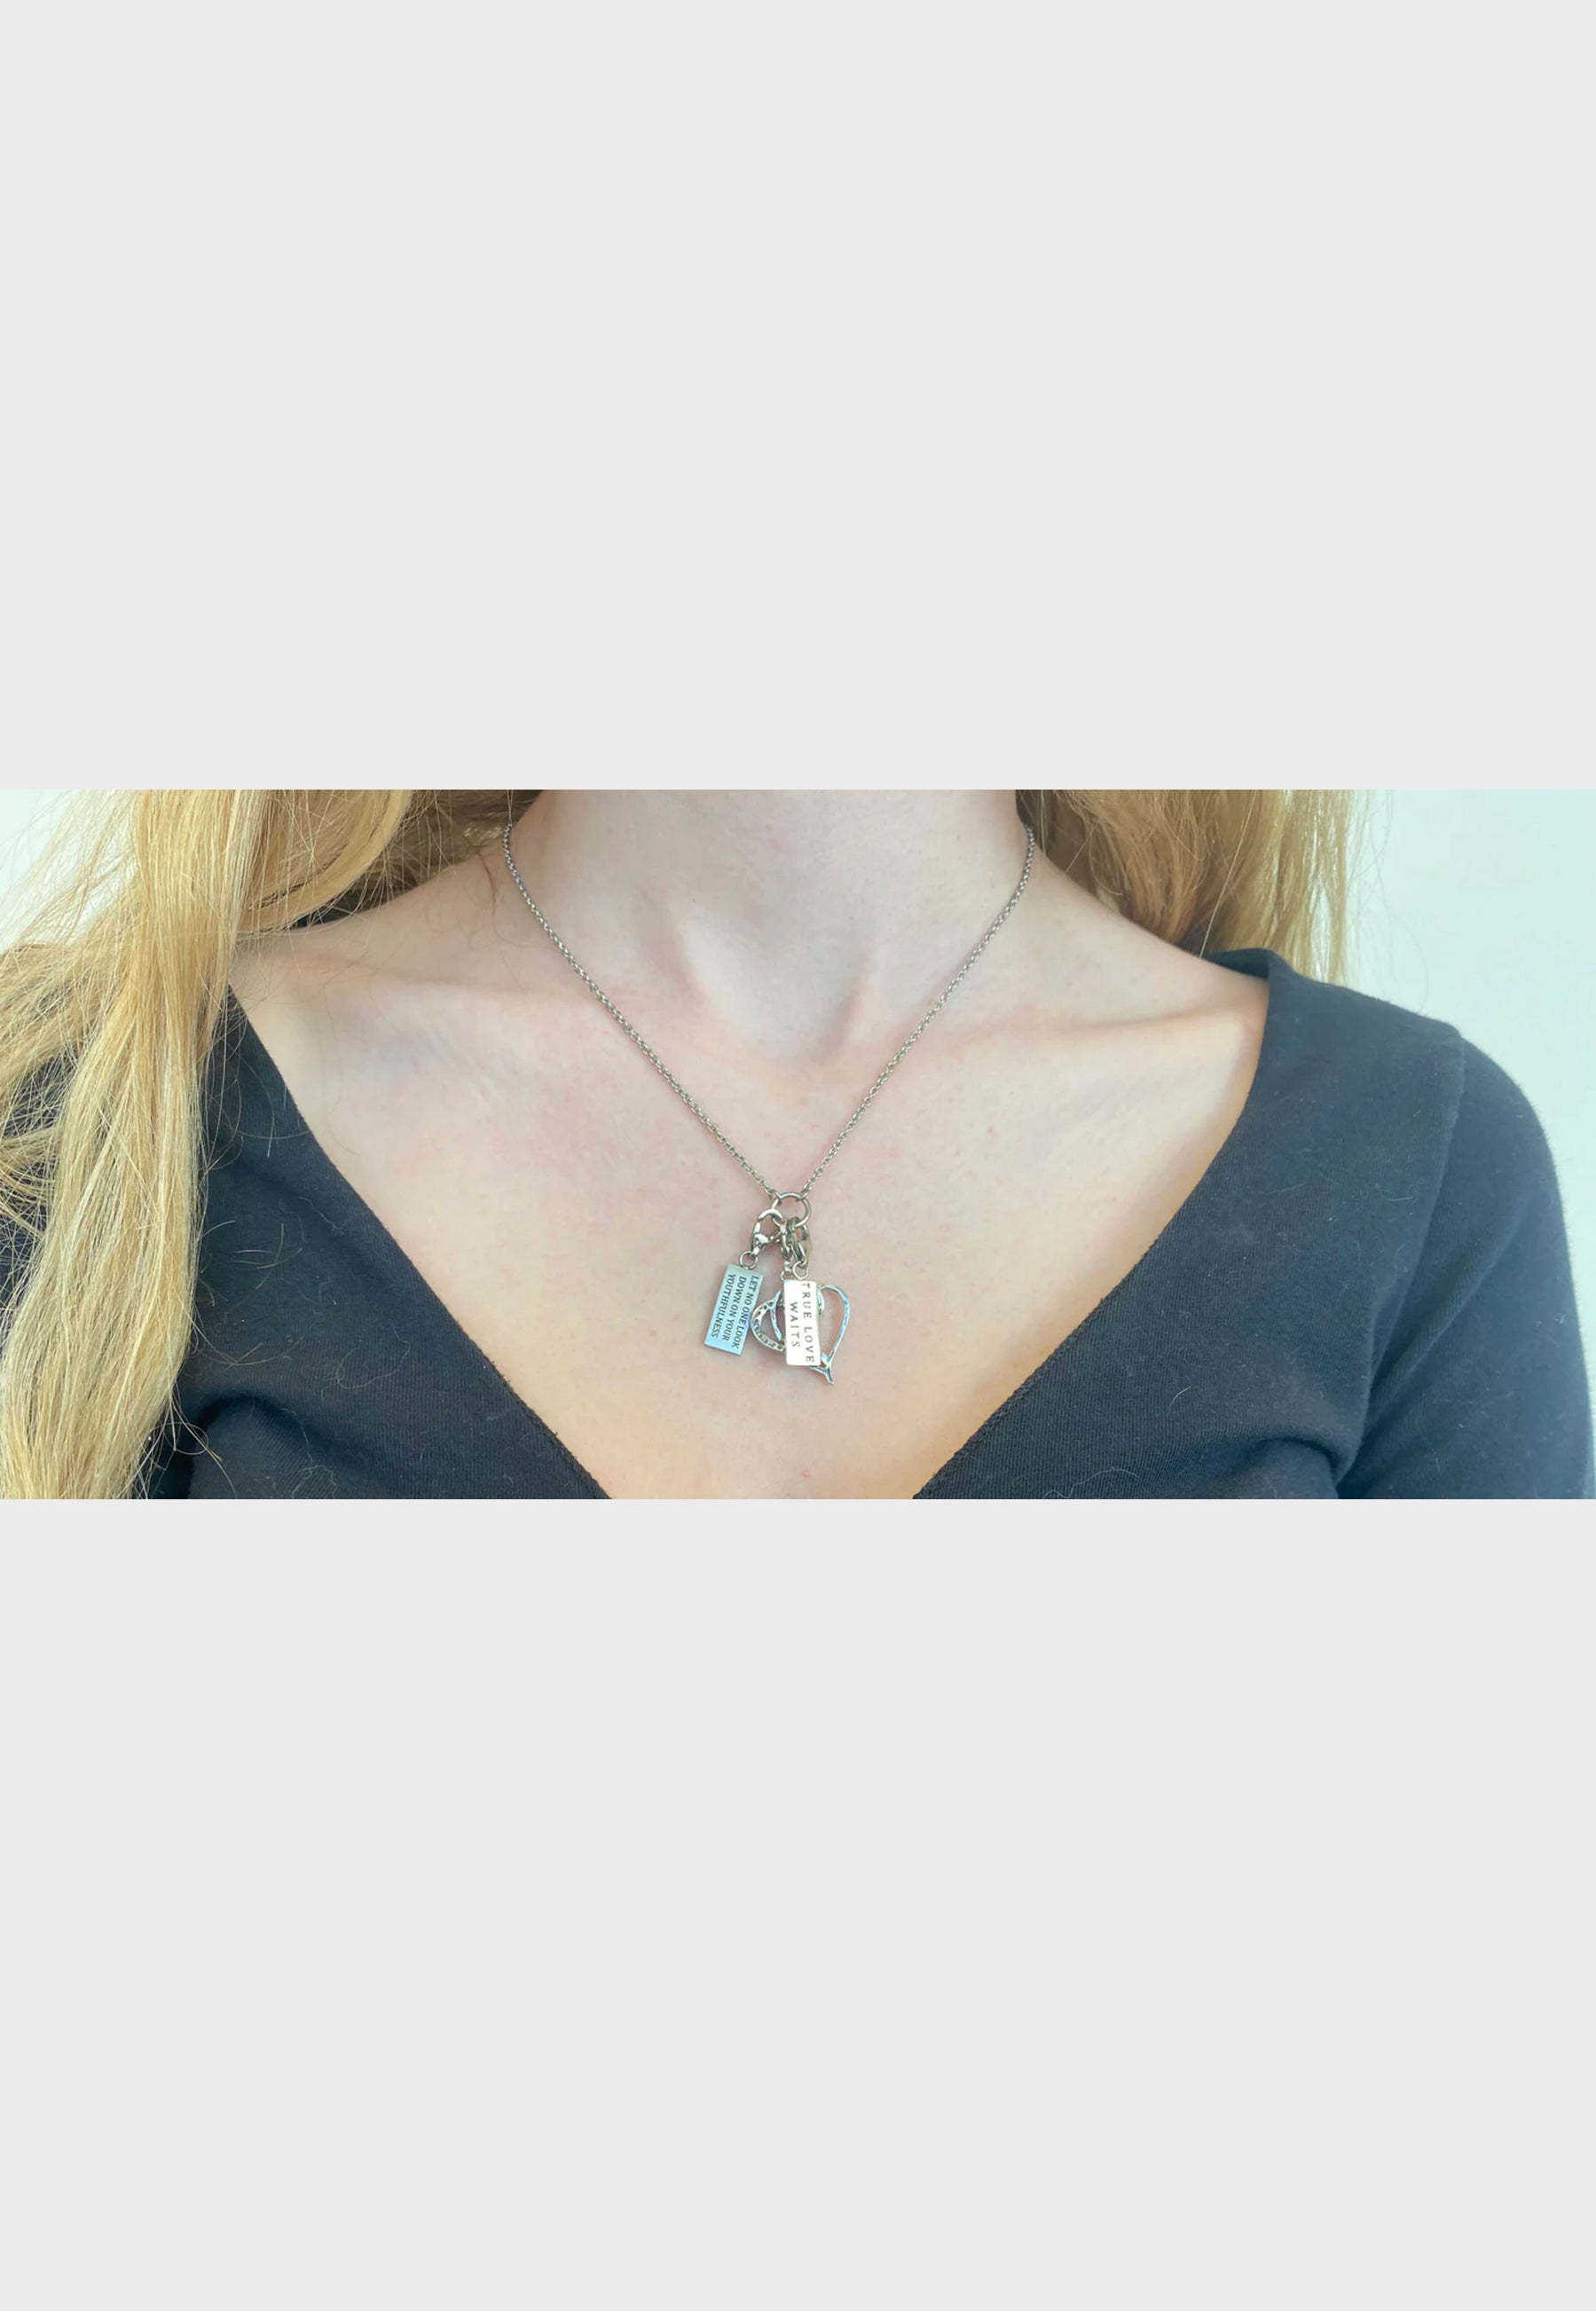 Woman wearing Christian charm necklace